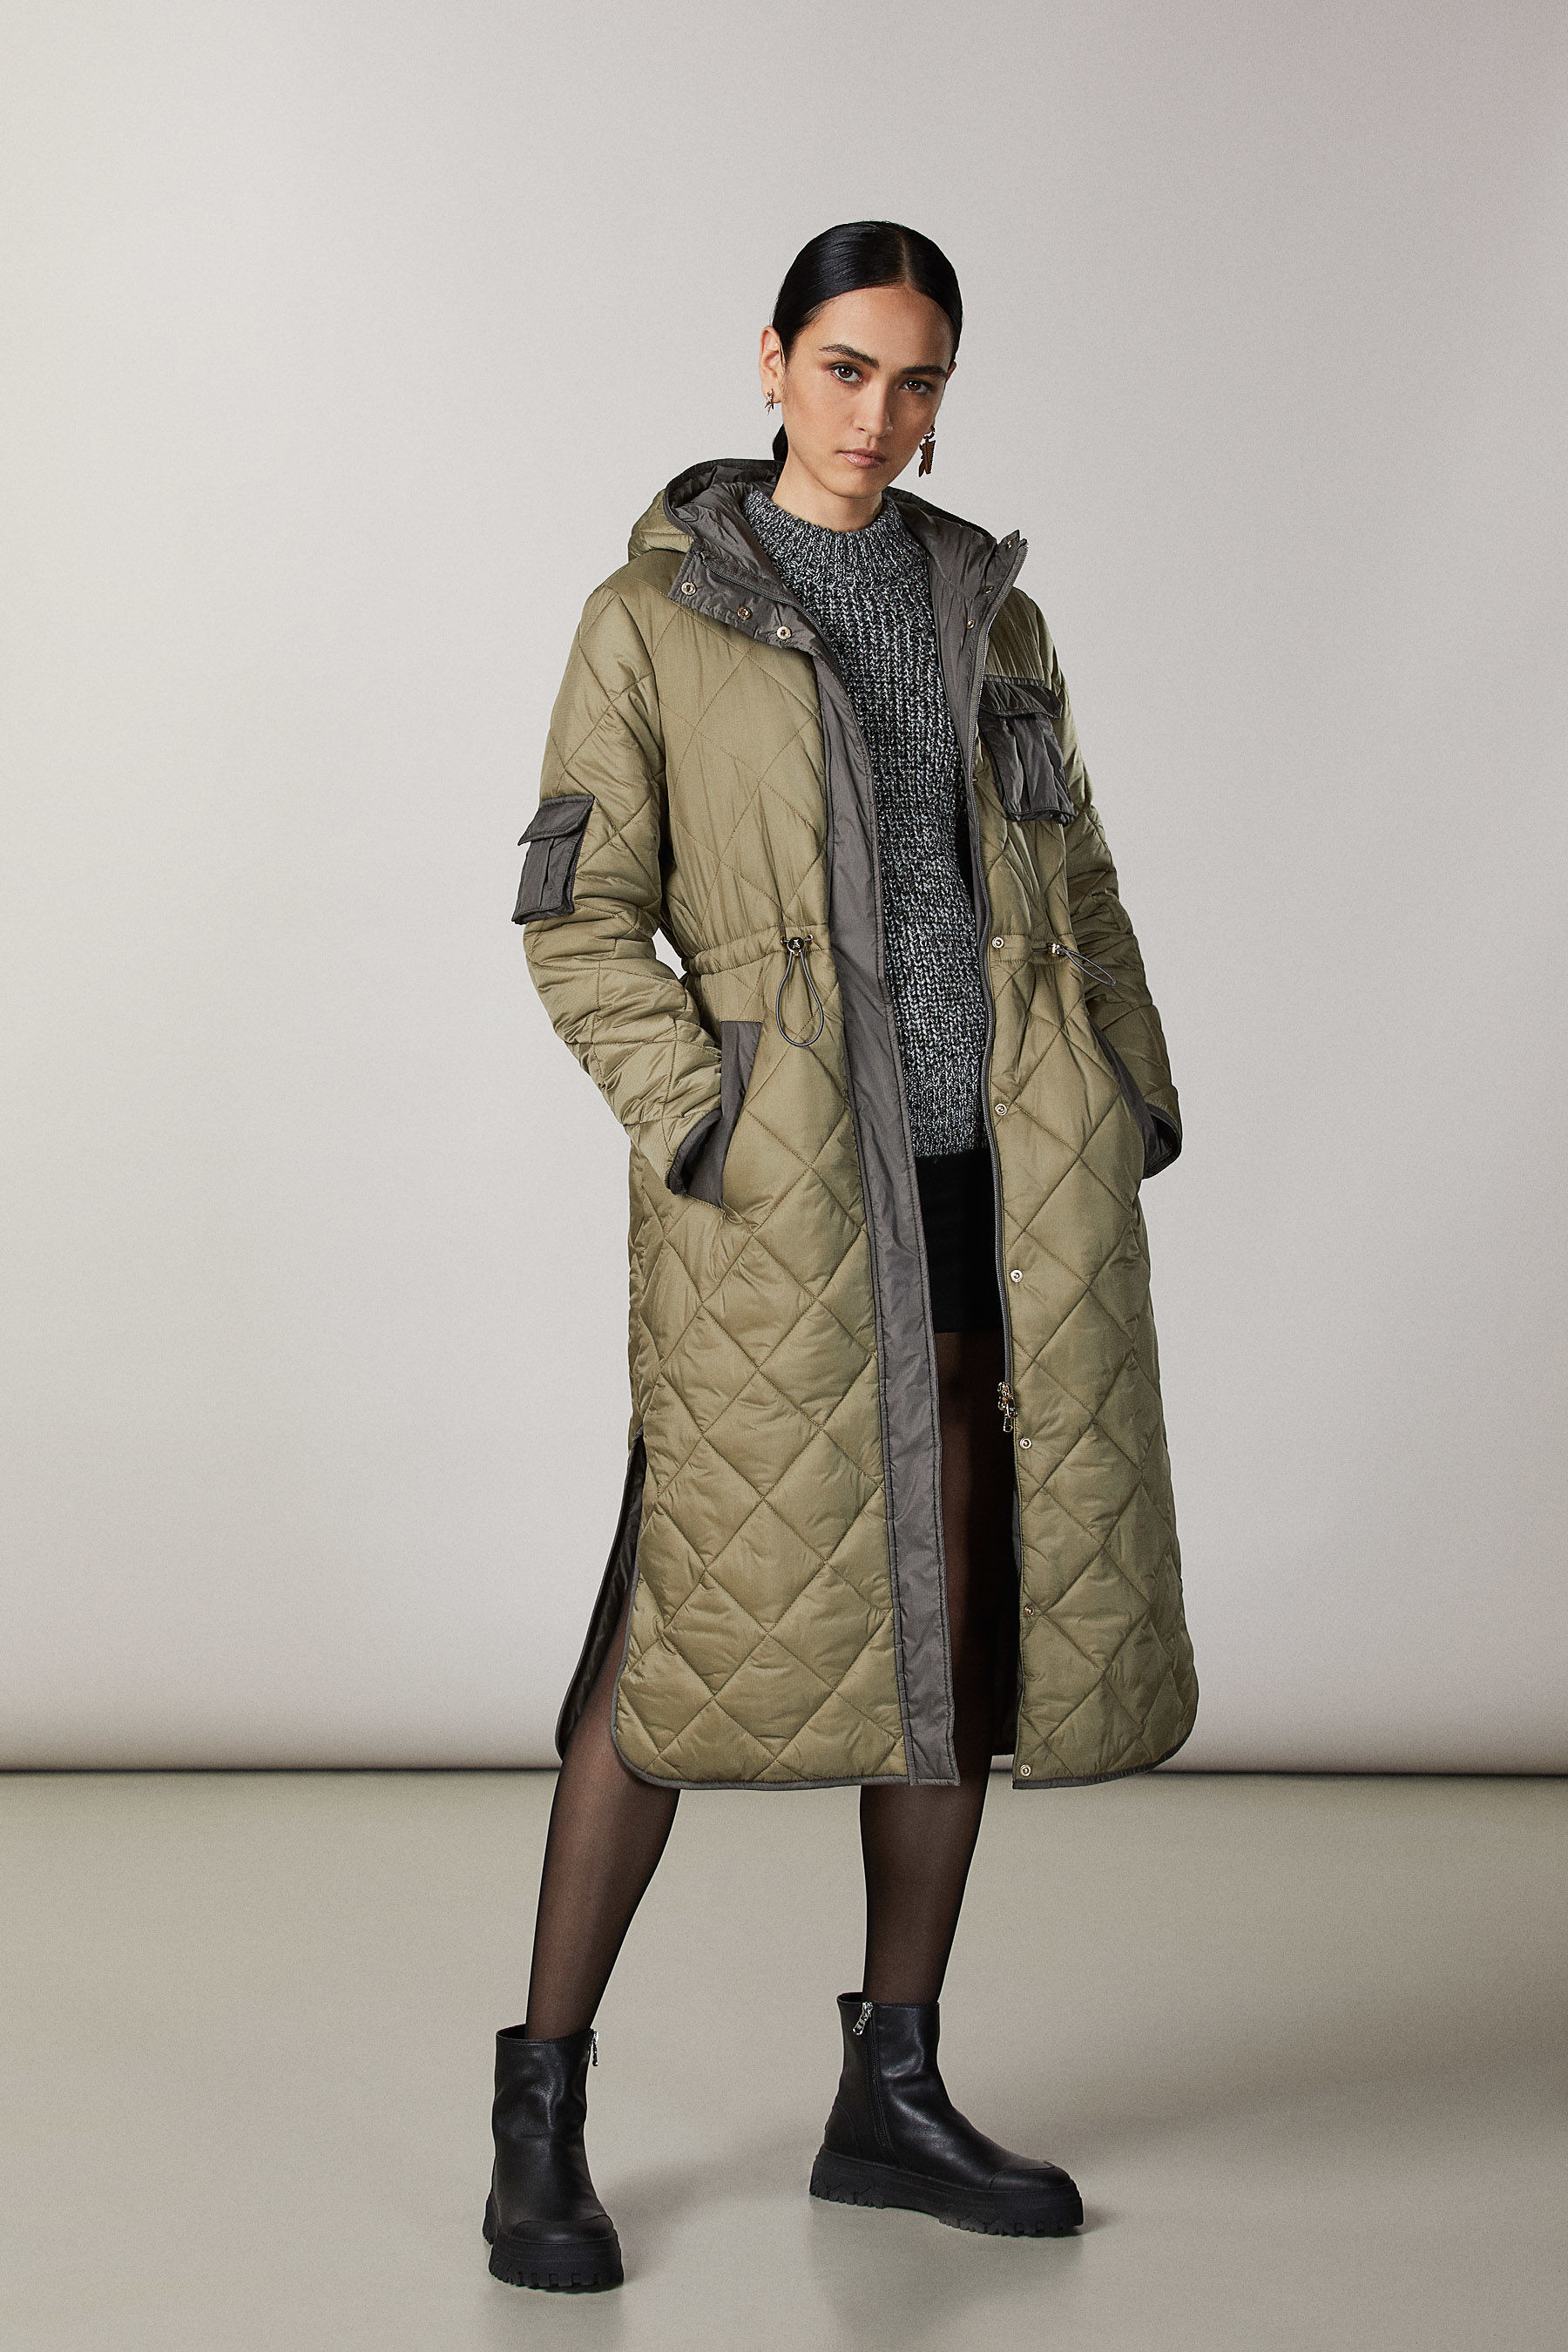 Coats and Jackets for Women Fall Winter 